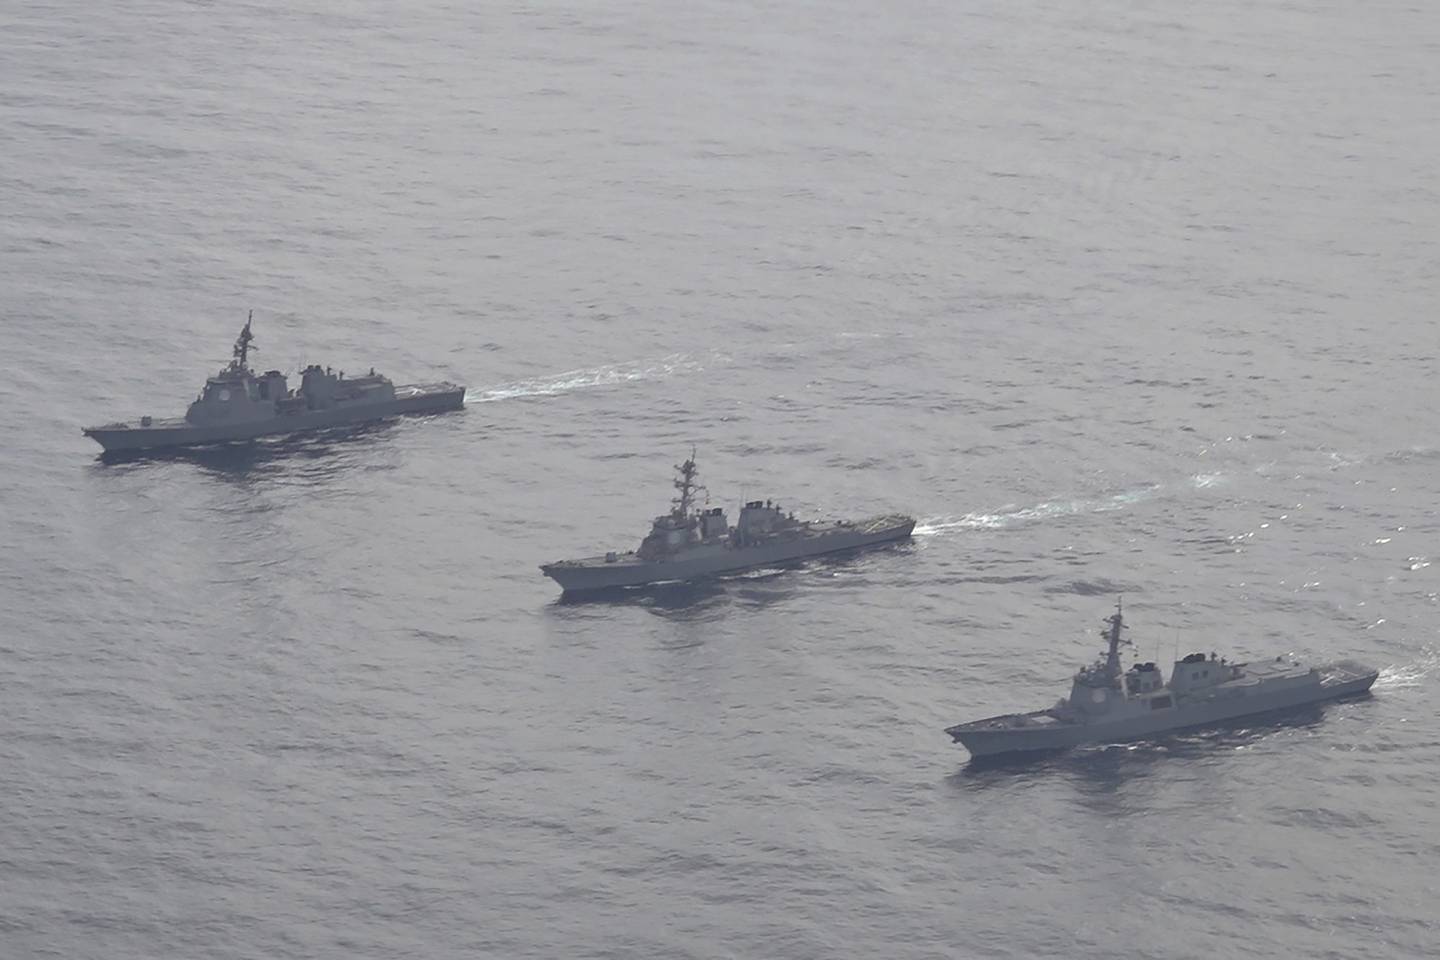 In this photo provided by South Korea Defense Ministry, Japan Maritime Self-Defense Force's destroyer Atago, left, U.S. Navy's Arleigh Burke-class guided-missile destroyer USS Barry, center, and South Korean Navy's Aegis destroyer King Sejong the Great, right, sail during a joint missile defense drill among South Korea, the United States and Japan in the international waters of the east coast of Korean peninsular, on Feb. 22, 2023.